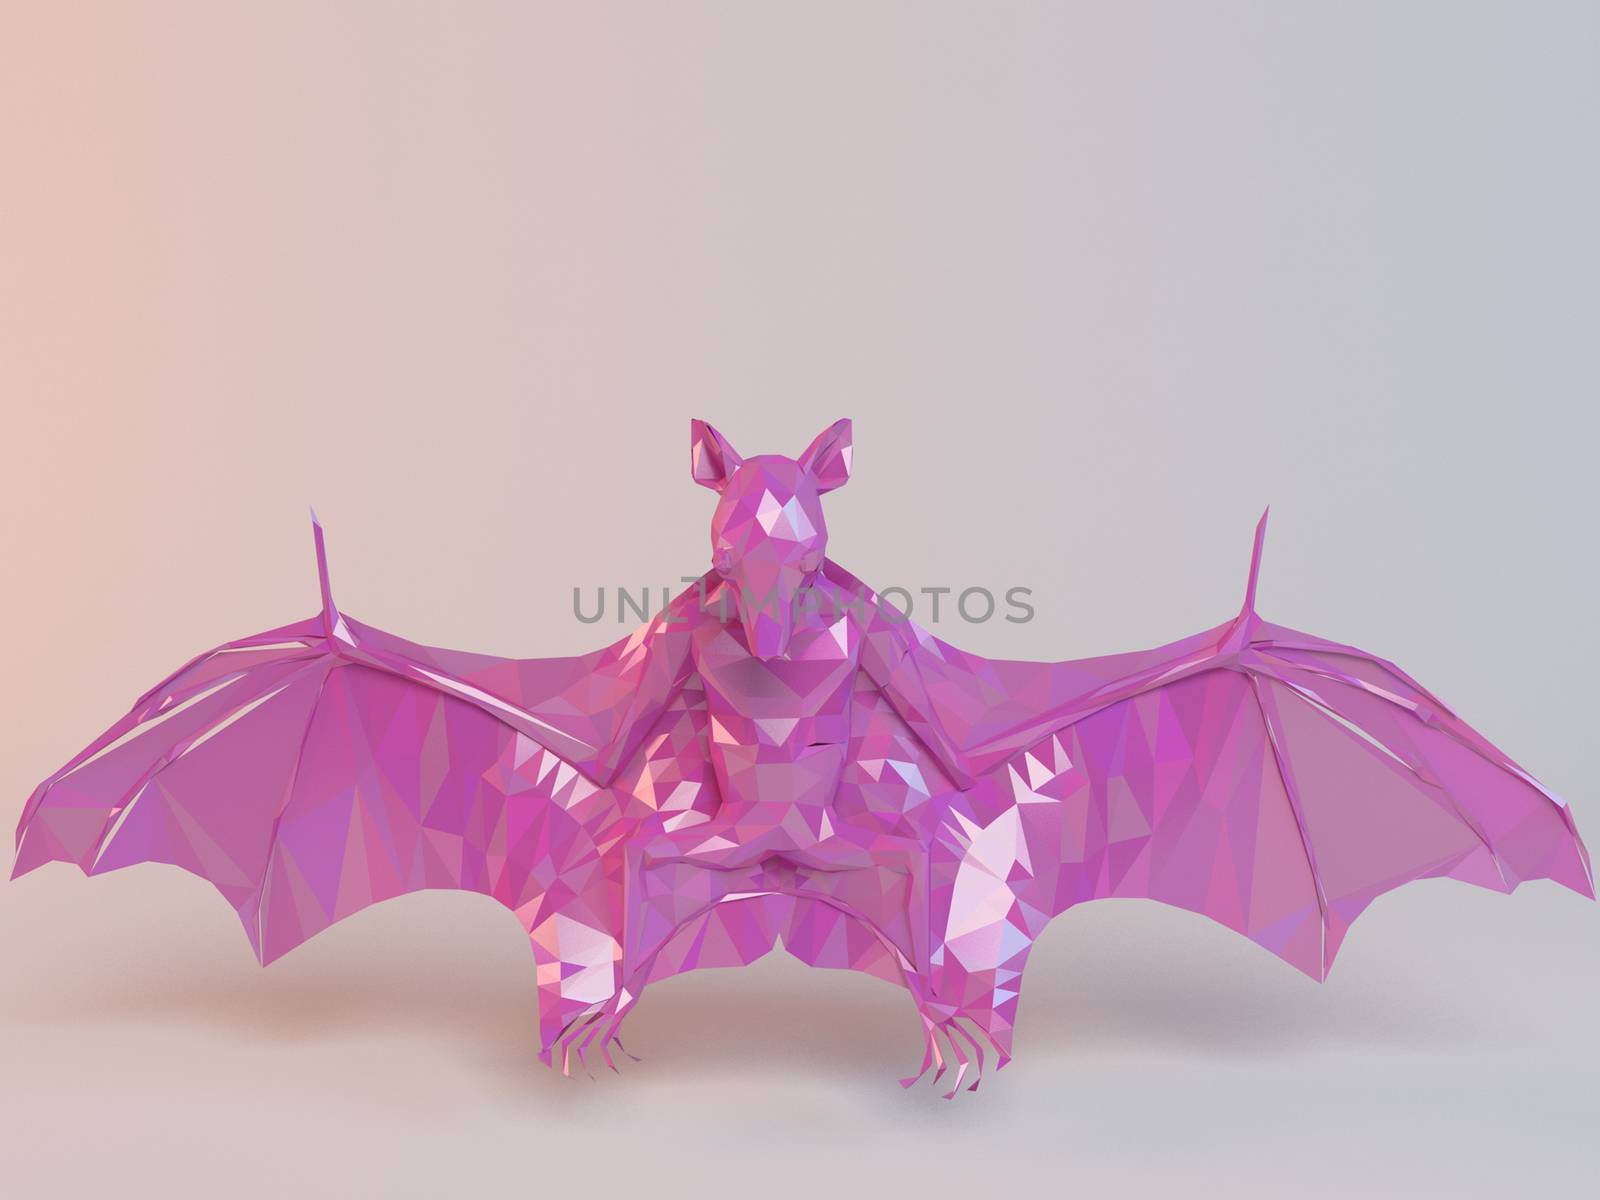 3D pink low poly (bat) inside a white stage with high render quality to be used as a logo, medal, symbol, shape, emblem, icon, children story, or any other use.